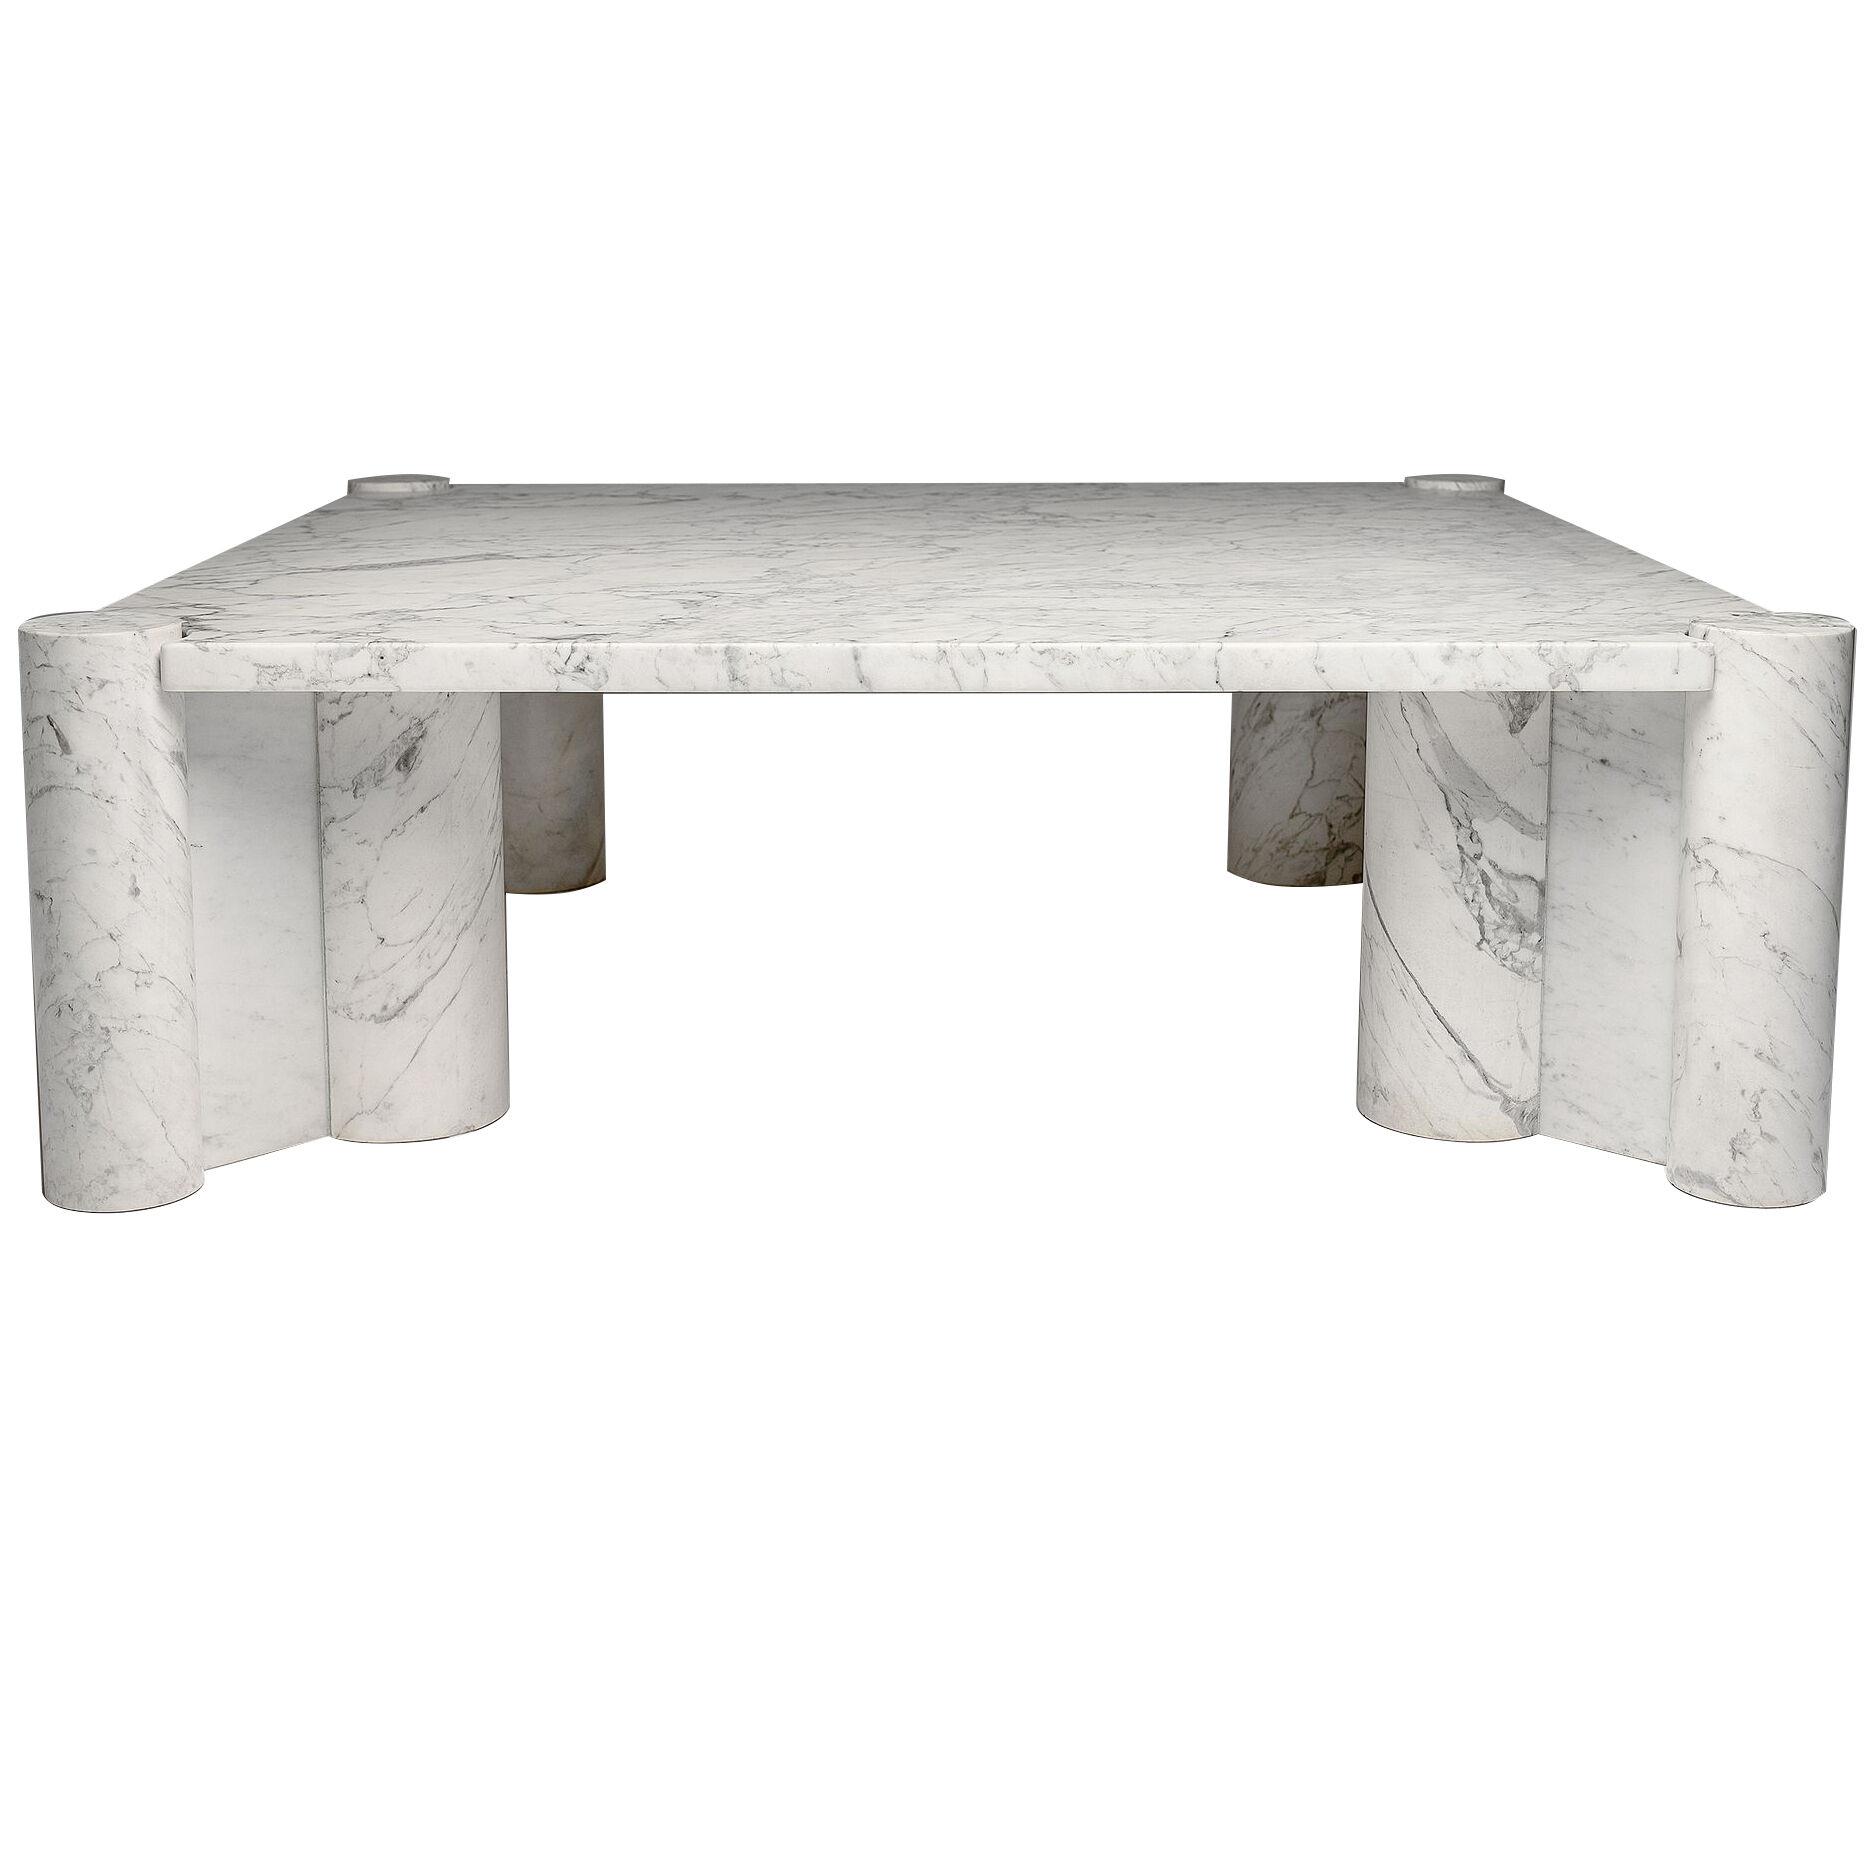 Gae Aulenti Coffee Table in Honed White Carrara Marble for Knoll International